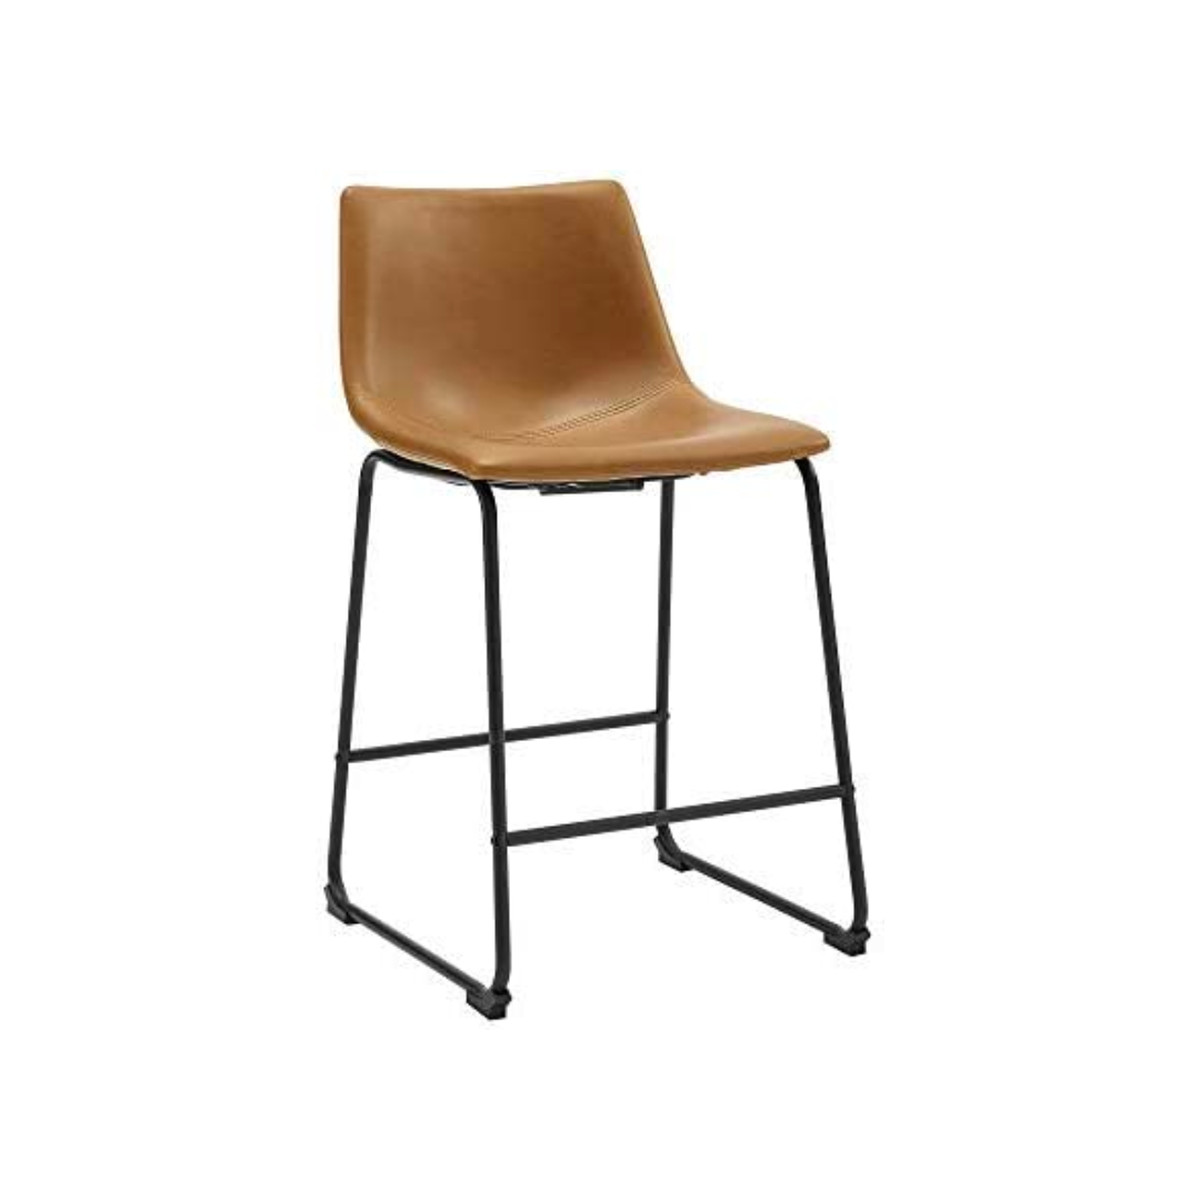 Whiskey brown-colored Walker Edison counter stool